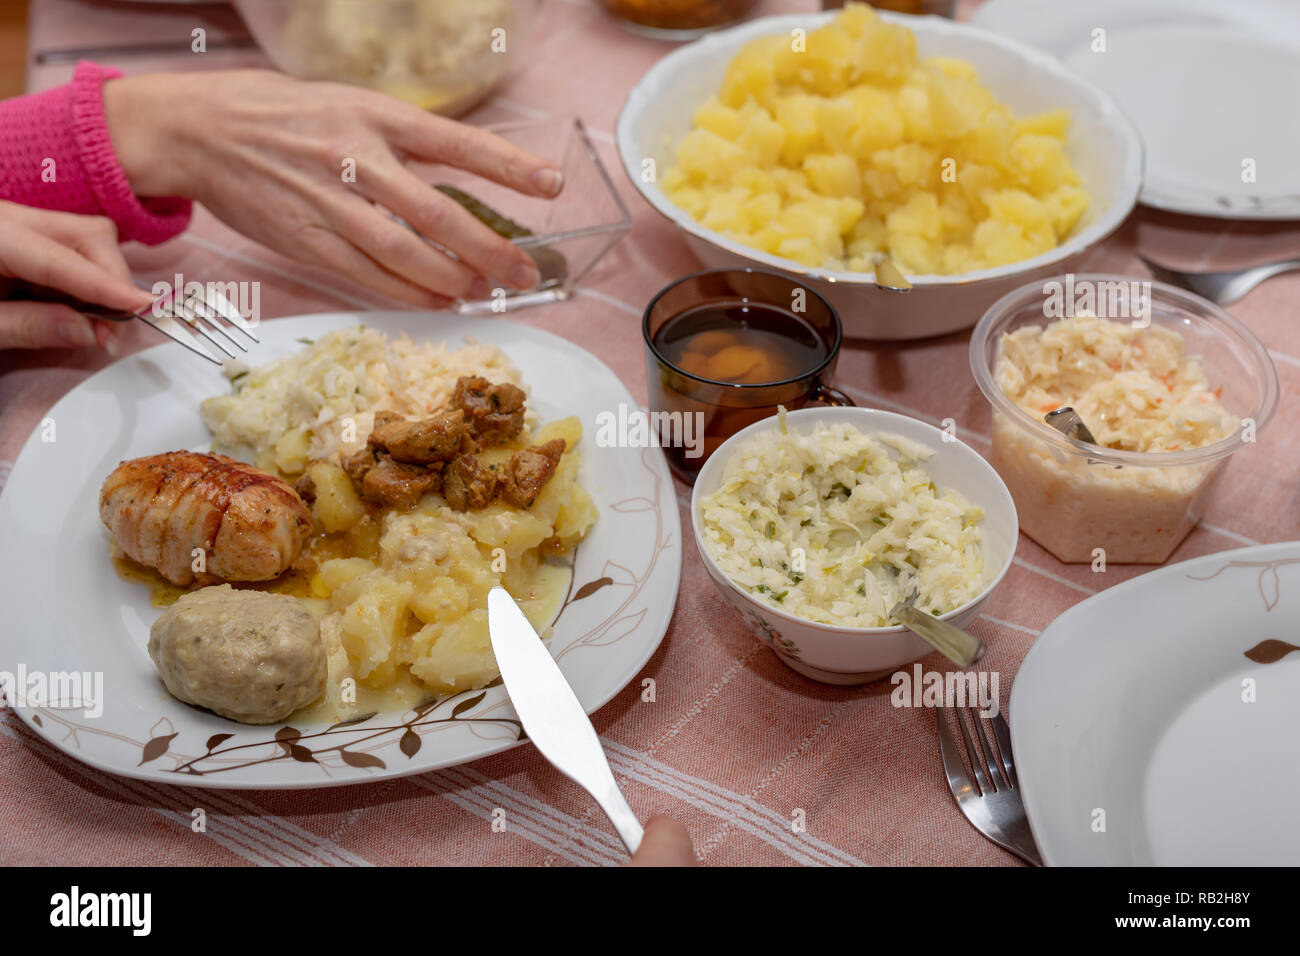 Dishes prepared for a homemade dinner. Family meeting at the kitchen table. Light background. Stock Photo